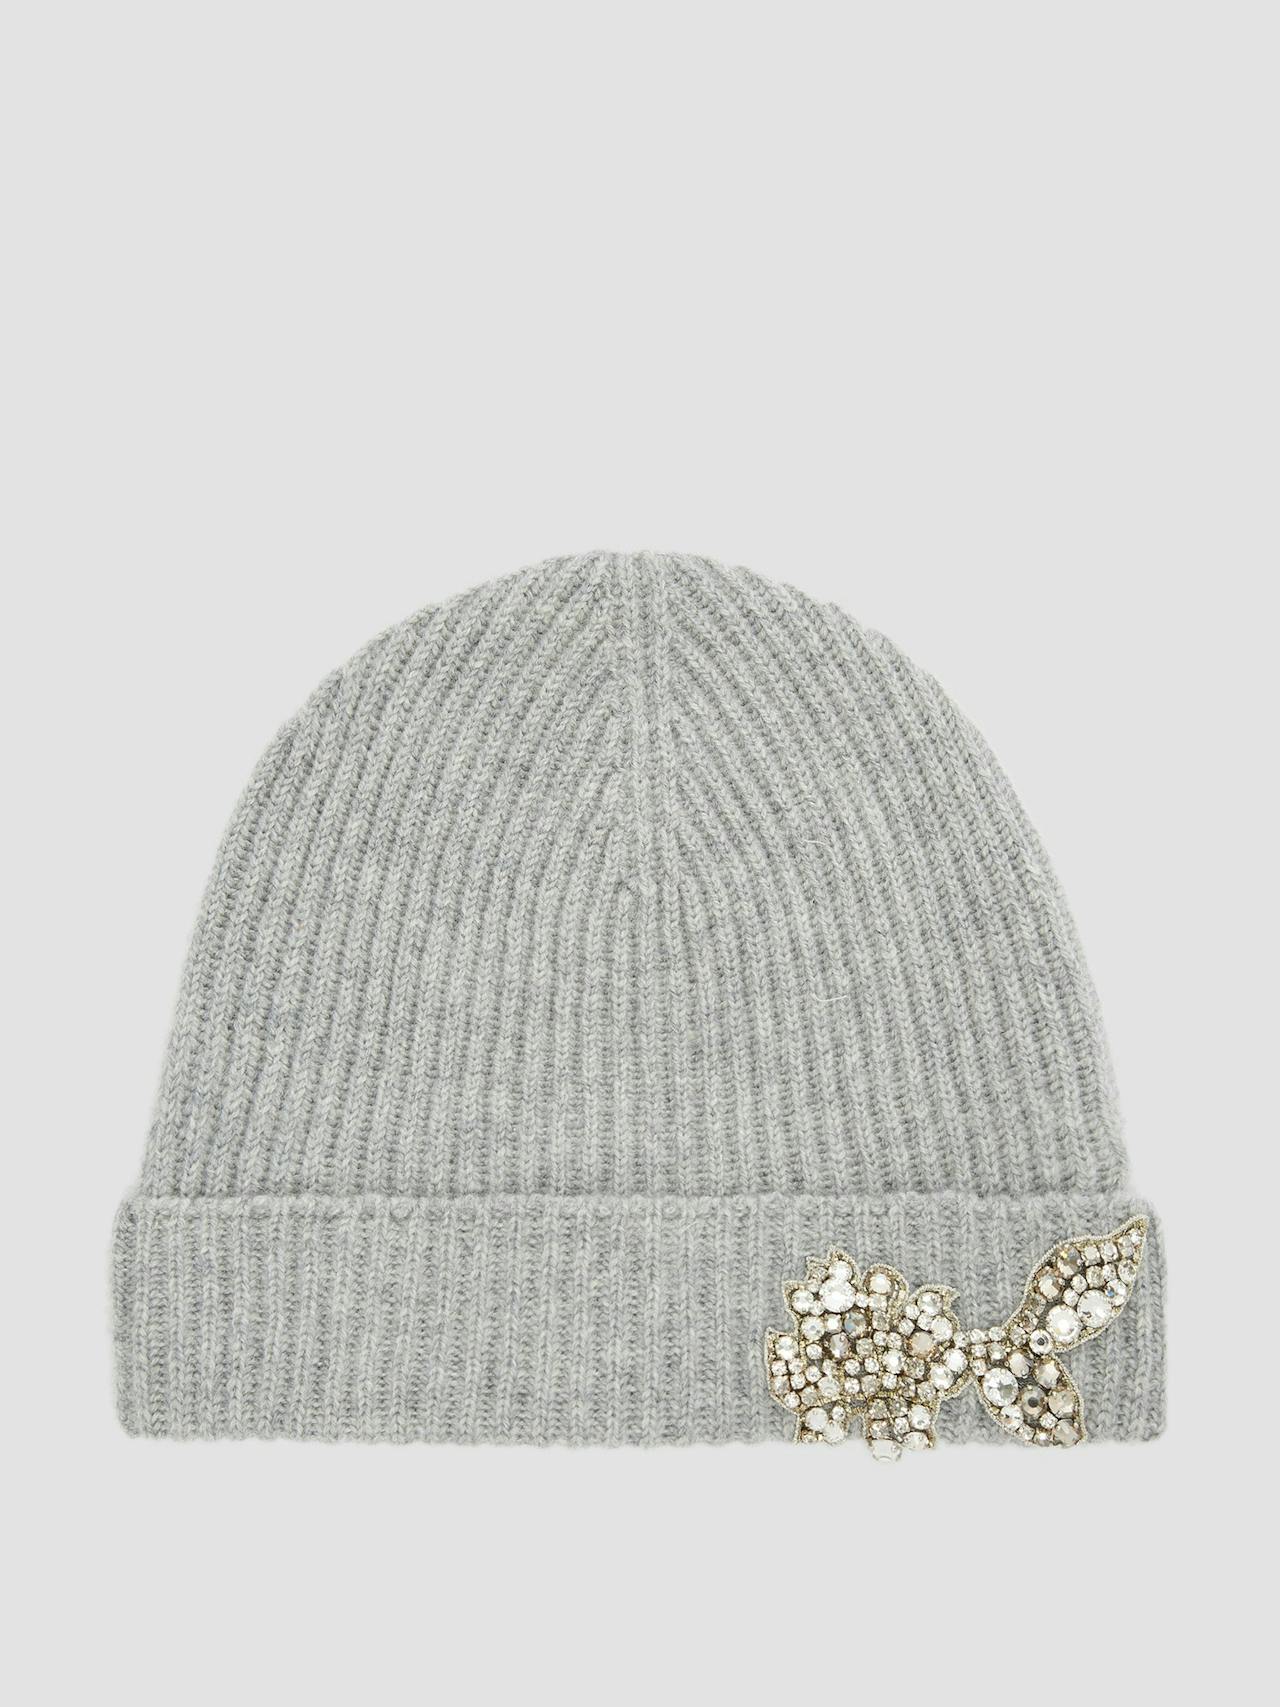 Grey embroidered knitted hat